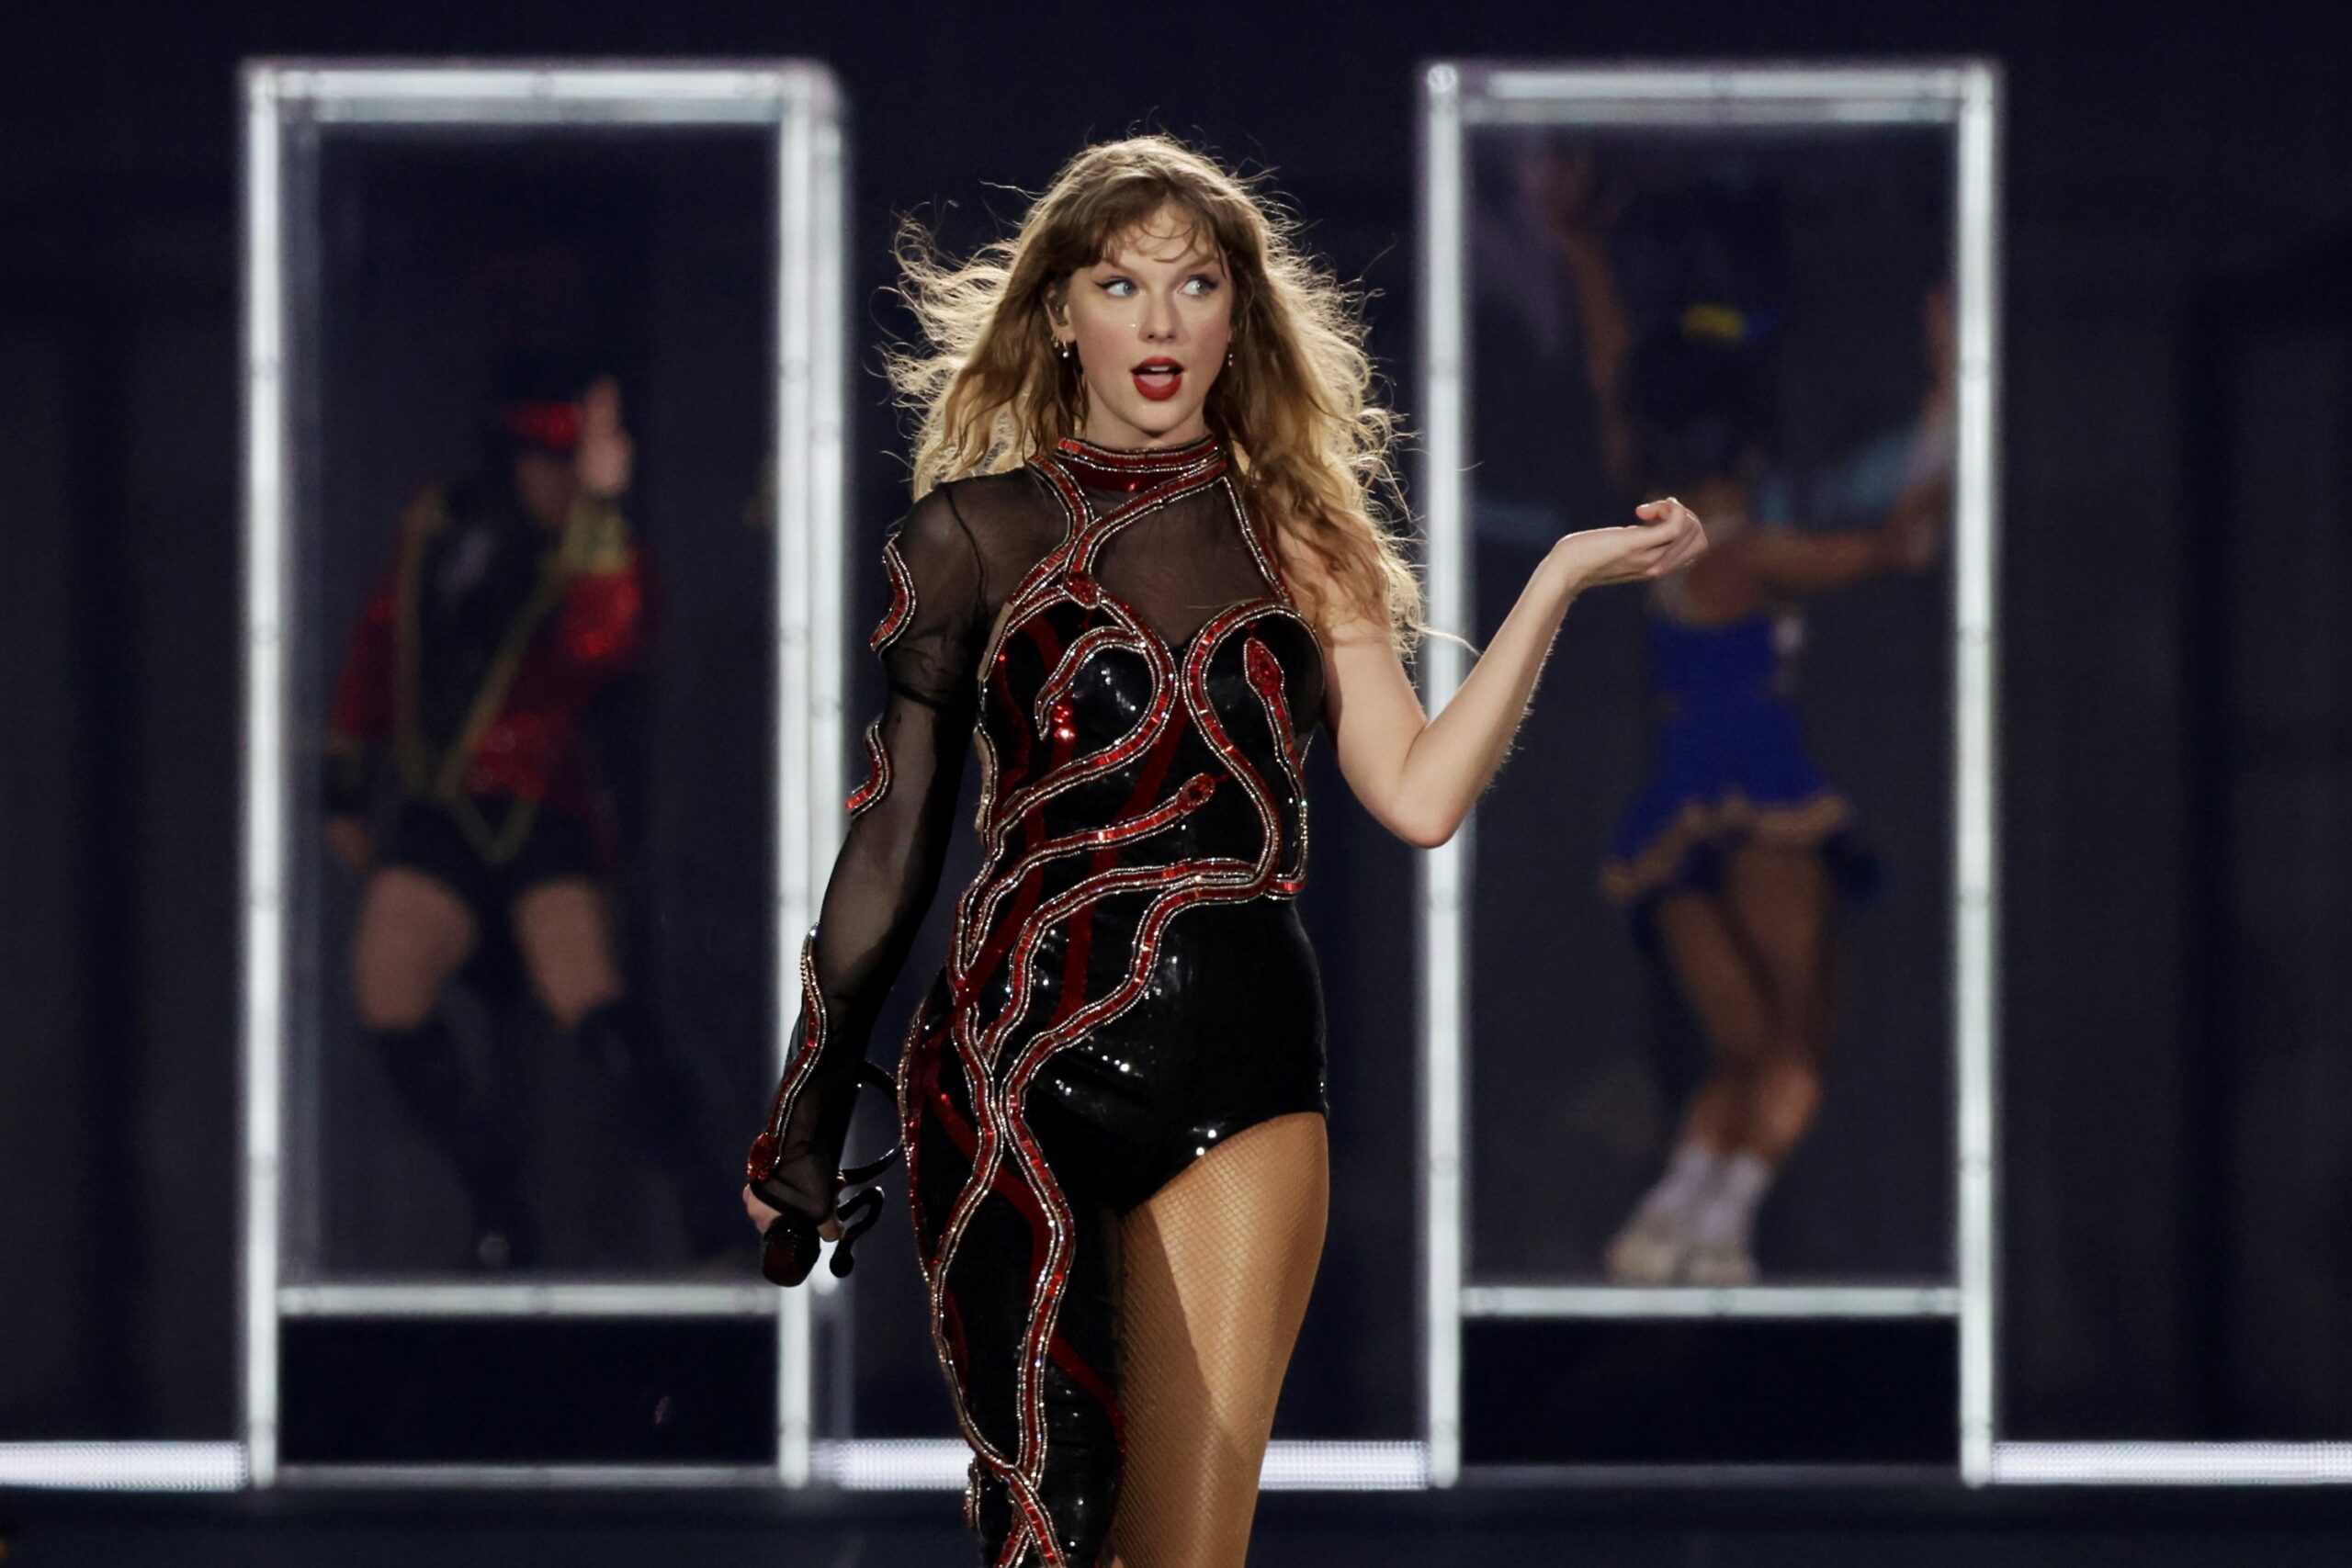 Taylor Swift performing at The Eras Tour in a black and red jumpsuit giving major side eye.